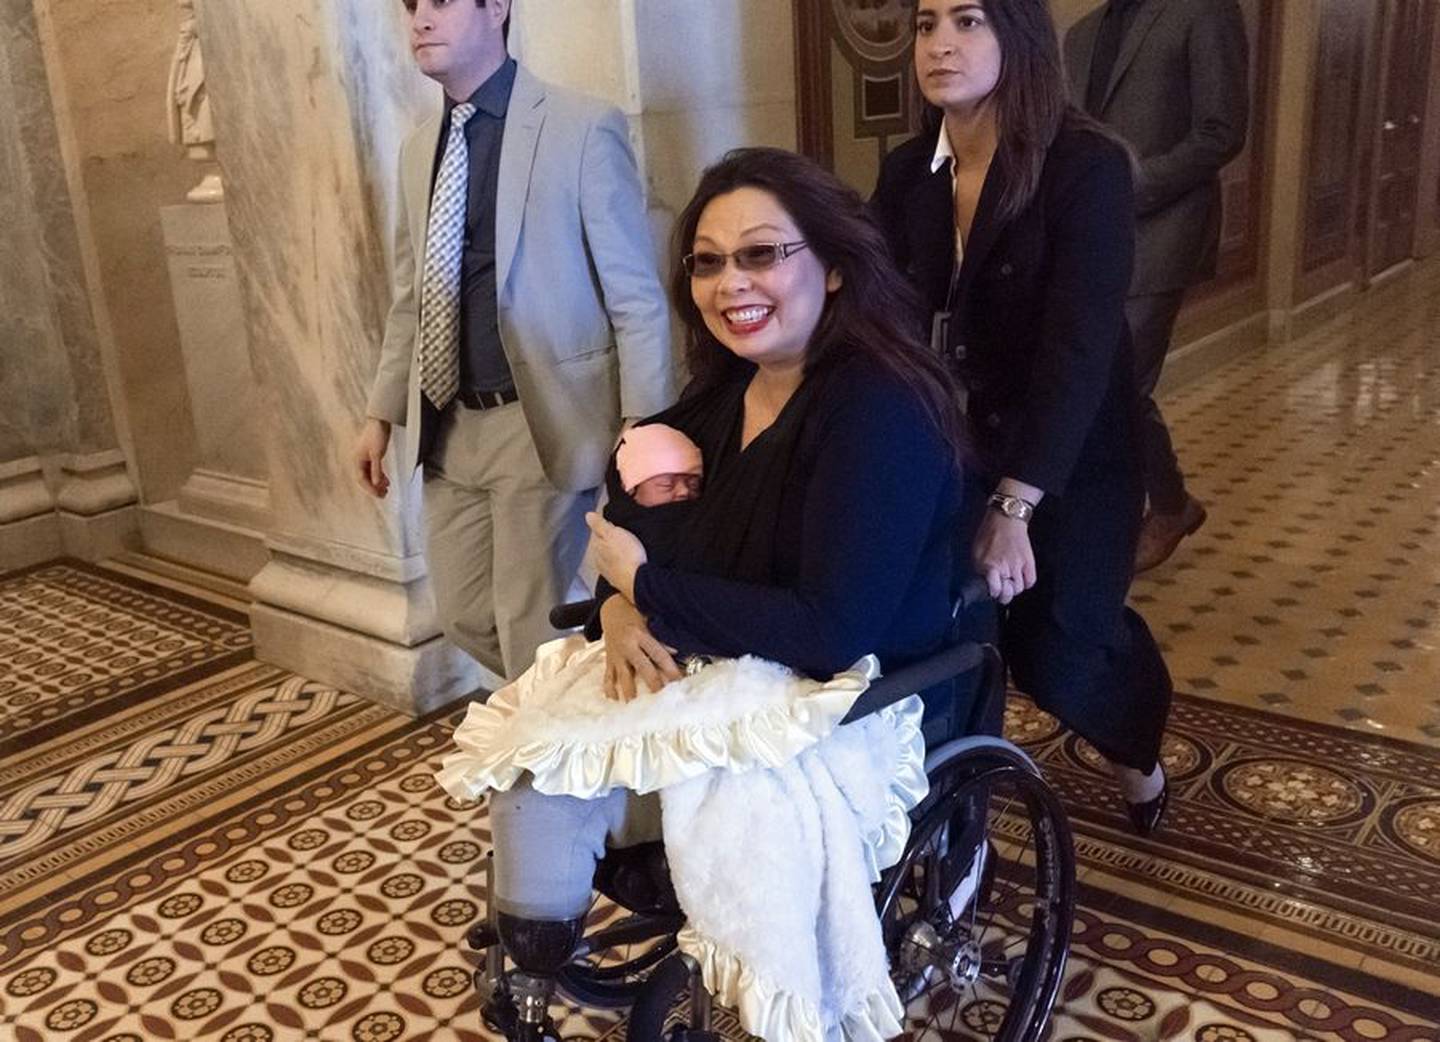 After her daughter Maile was born in 2018, U.S. Sen. Tammy Duckworth pushed for a Senate rule change so members' babies could be allowed on the floor during votes.